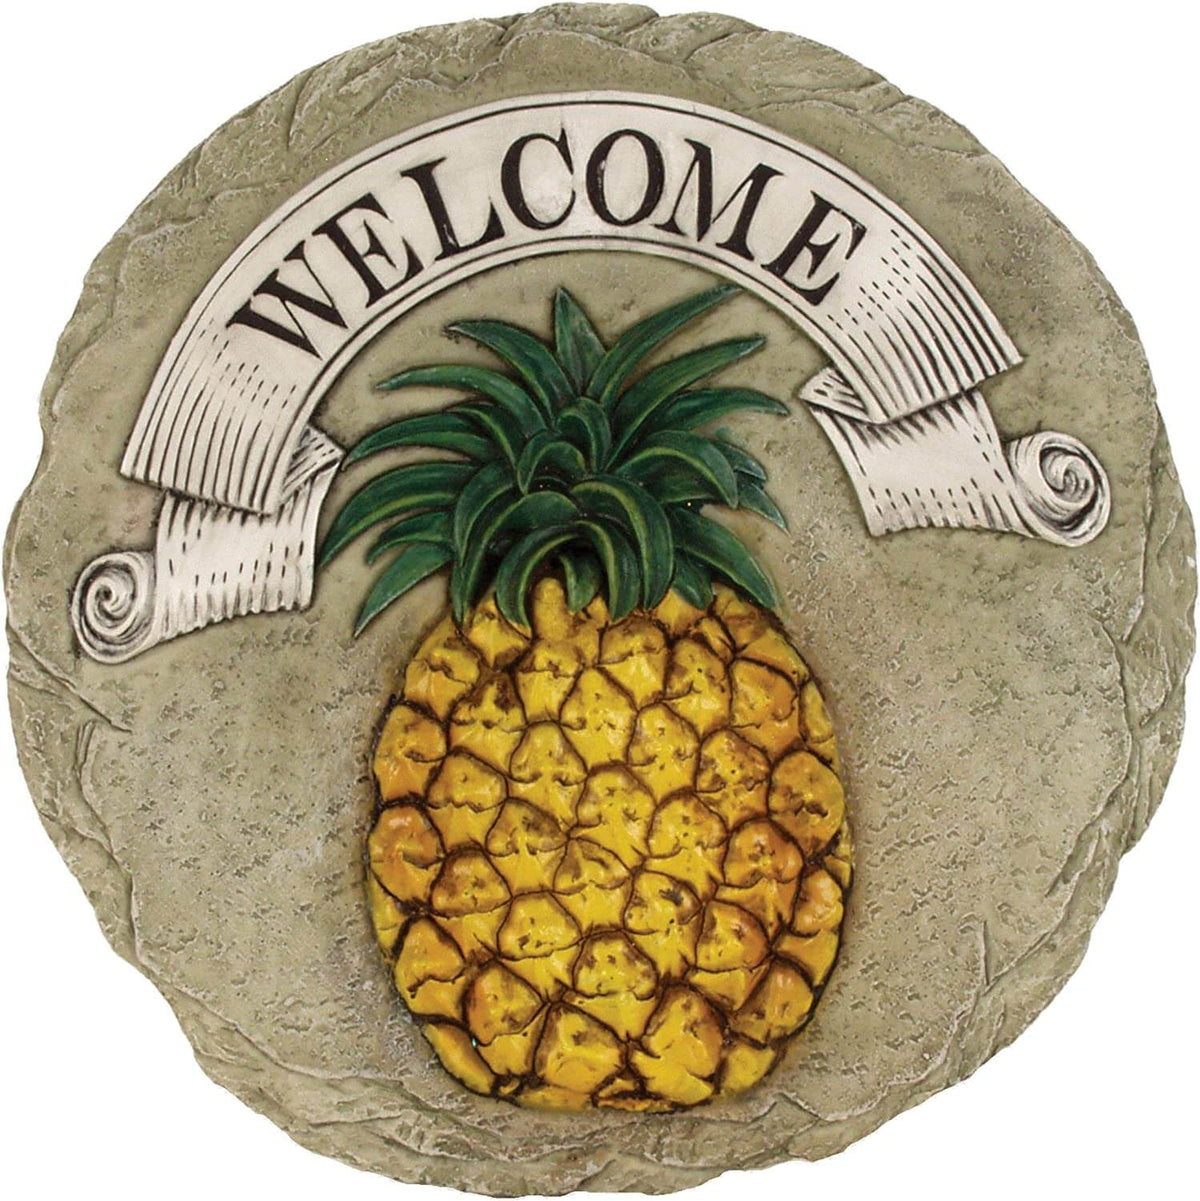  Pineapple Welcome Stepping Stone - The House of Awareness